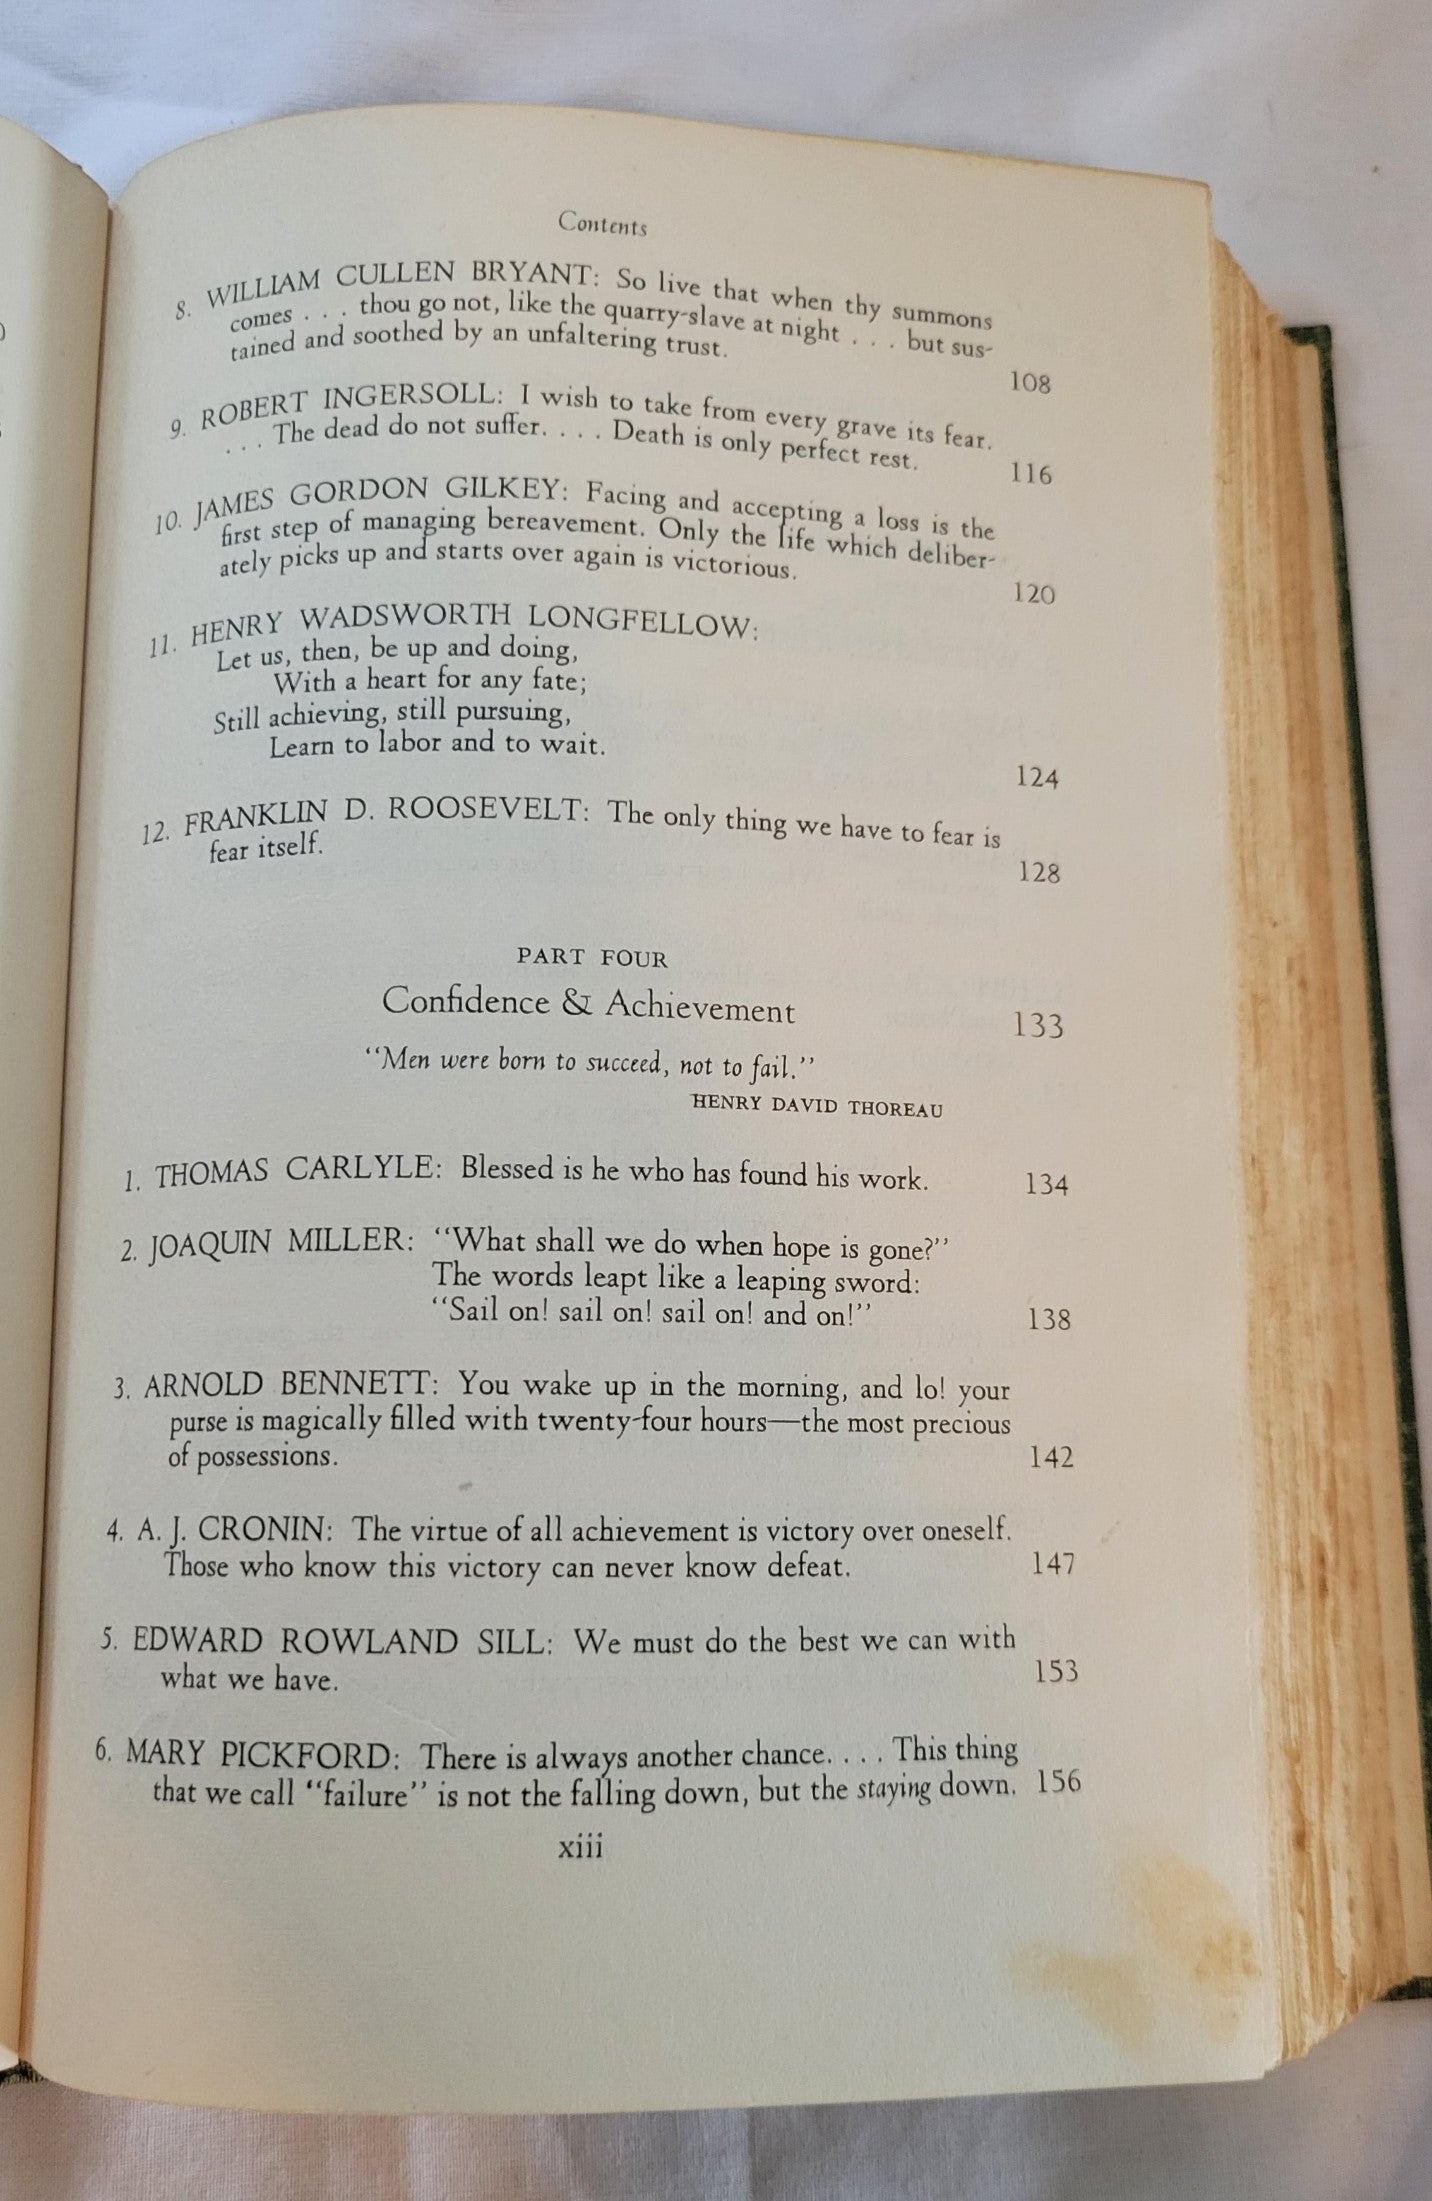 Vintage book for sale, “Light from Many Lamps” edited by Lillian Eichler Watson, 1951, a storehouse of inspired and inspiring reading, it is a collection of brief, stimulating biographies as well.  View of table of contents.